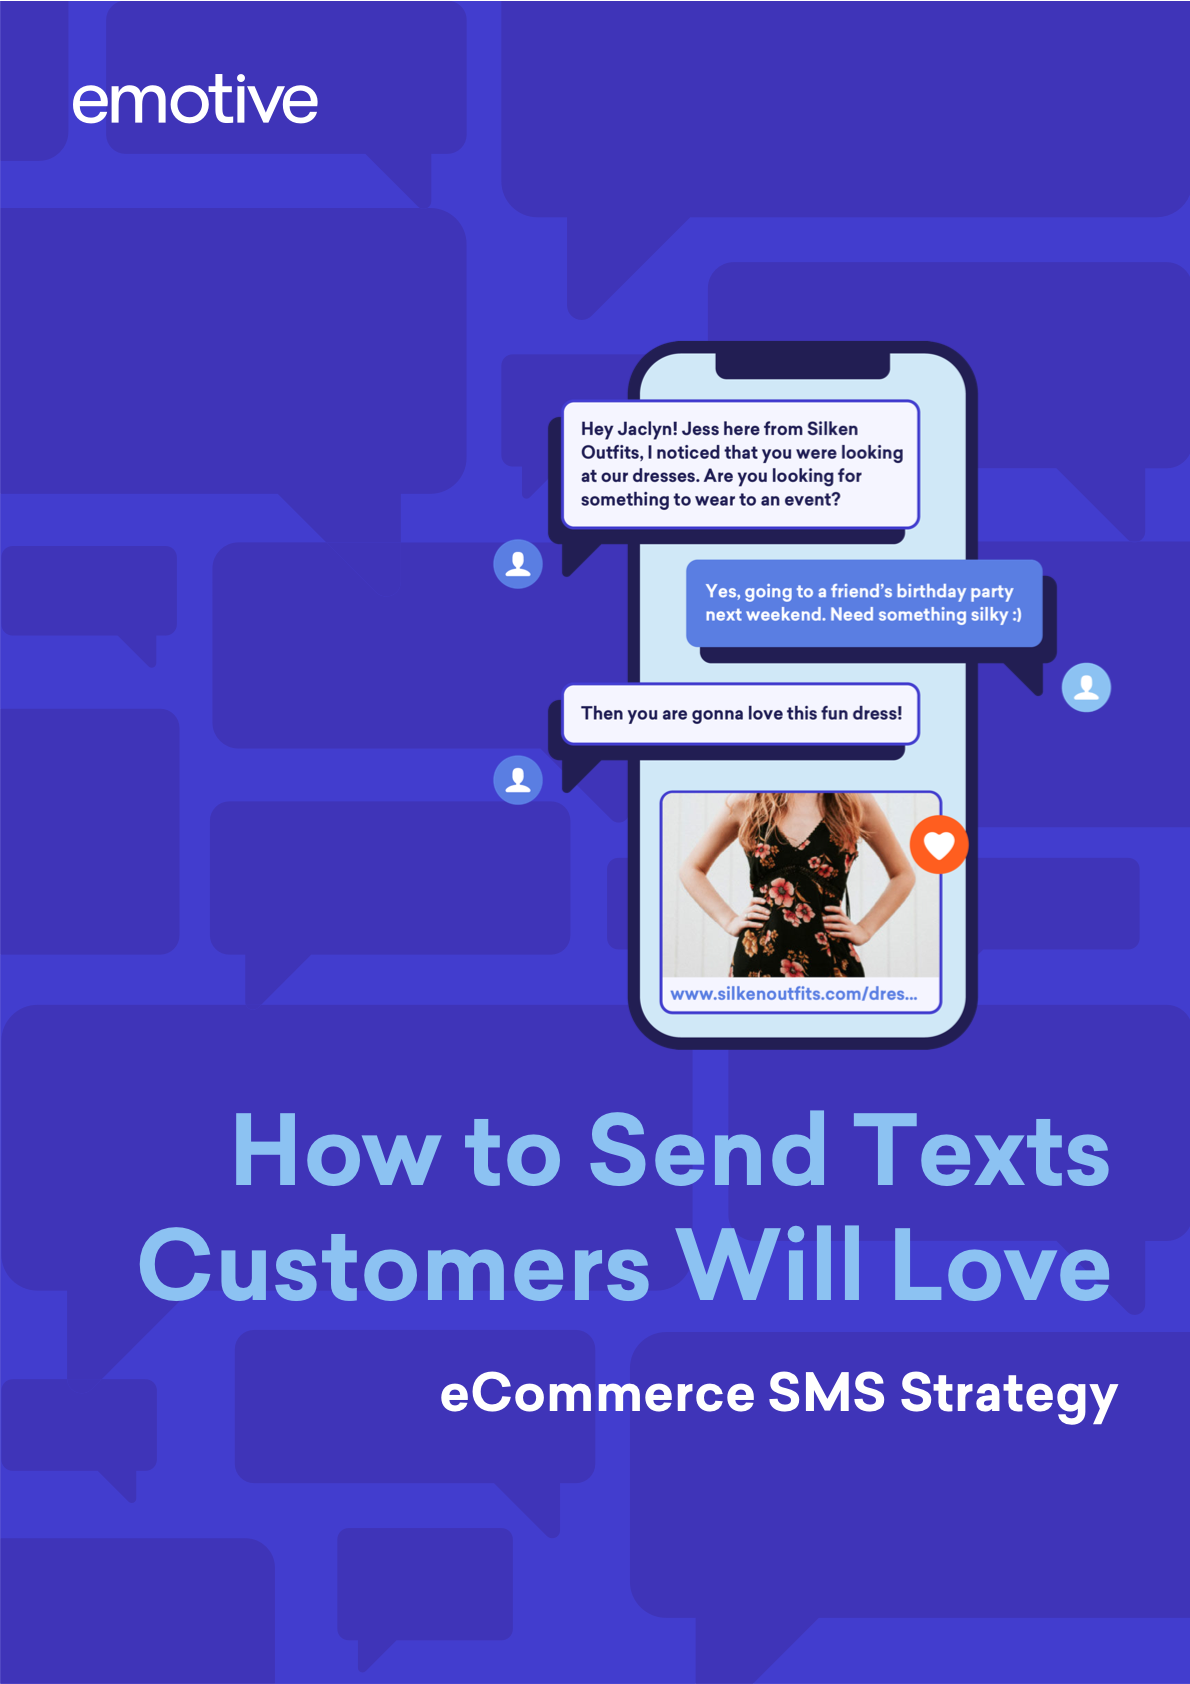 How to Send Texts Customers Will Love - eCommerce SMS Strategy Featured Image